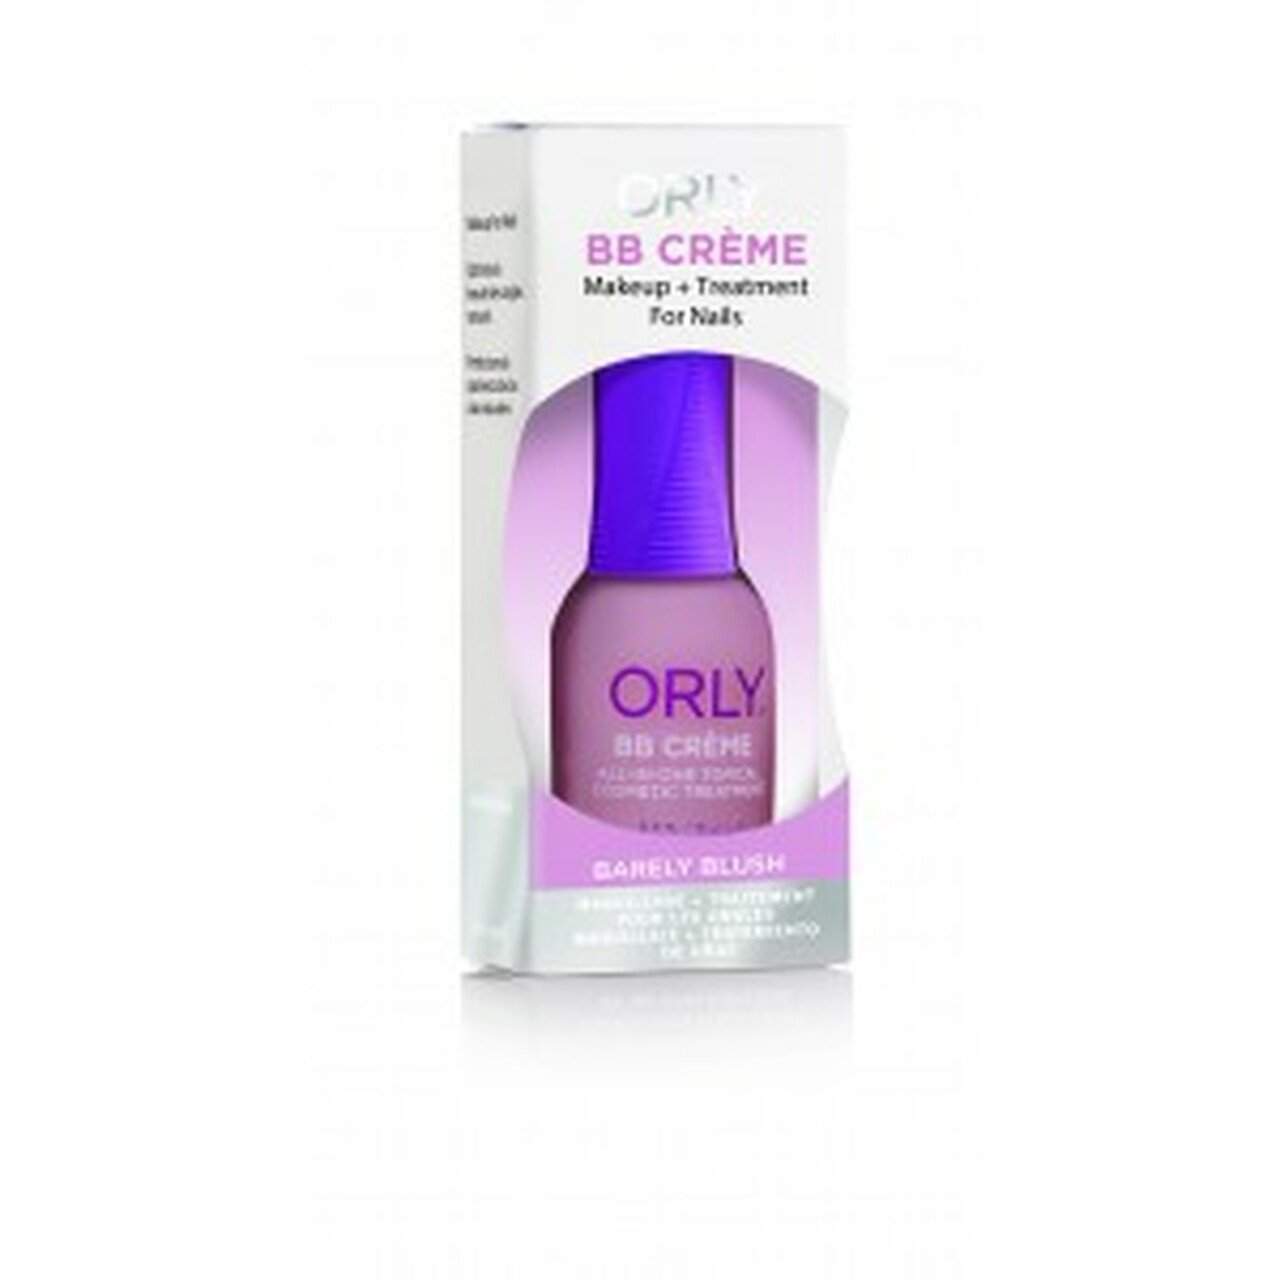 Orly Bb Creme Barely Blush .6Fl oz/18ml 24630-Orly-Brand_Orly,Collection_Nails,Nail_Treatments,ORLY_Treatments